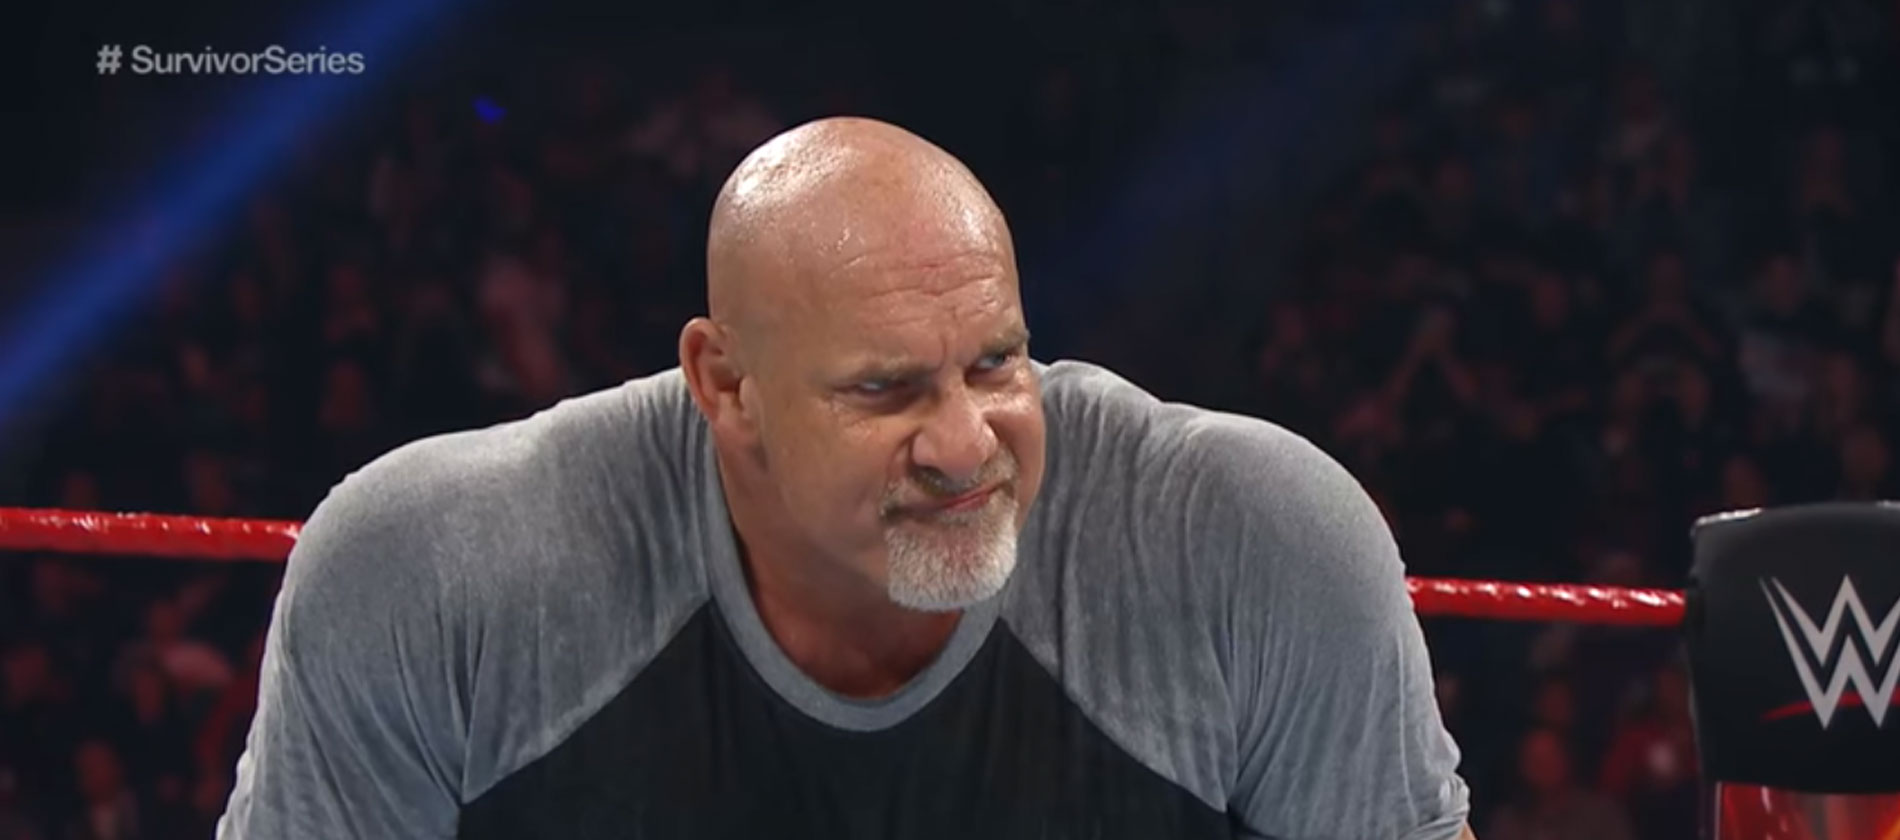 Wwe Raw Review Goldberg Returns To Spear Paul Heyman Out Of His Suit